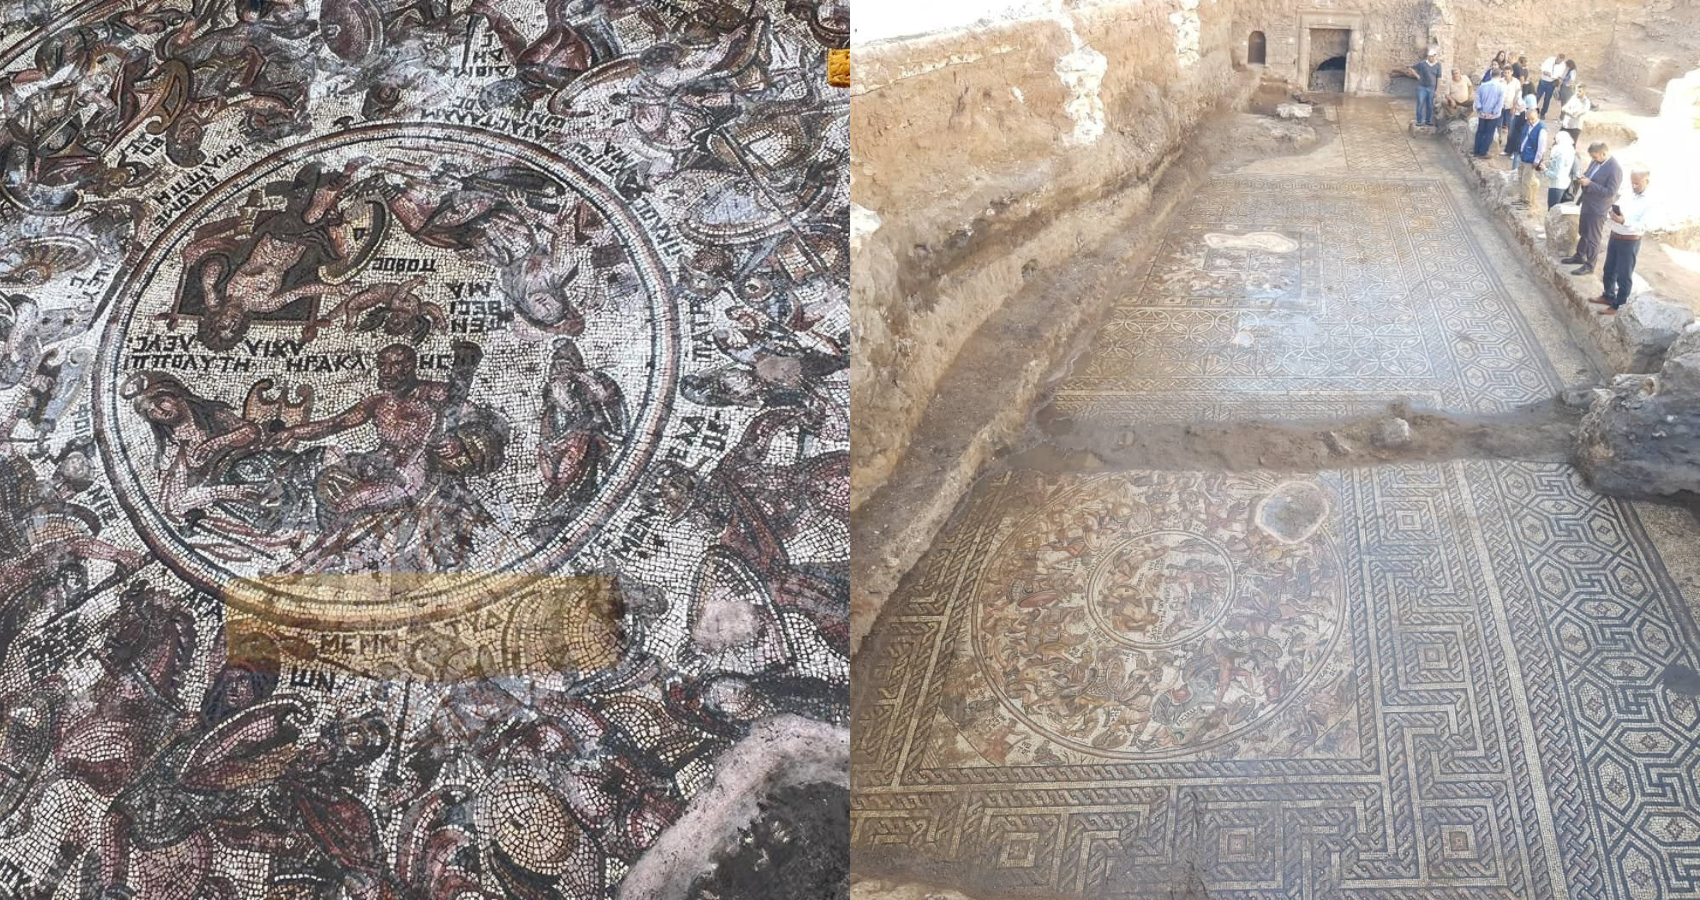 Stunning Roman-era mosaic unearthed in Syria’s Rastan, city bombarded by Assad regime